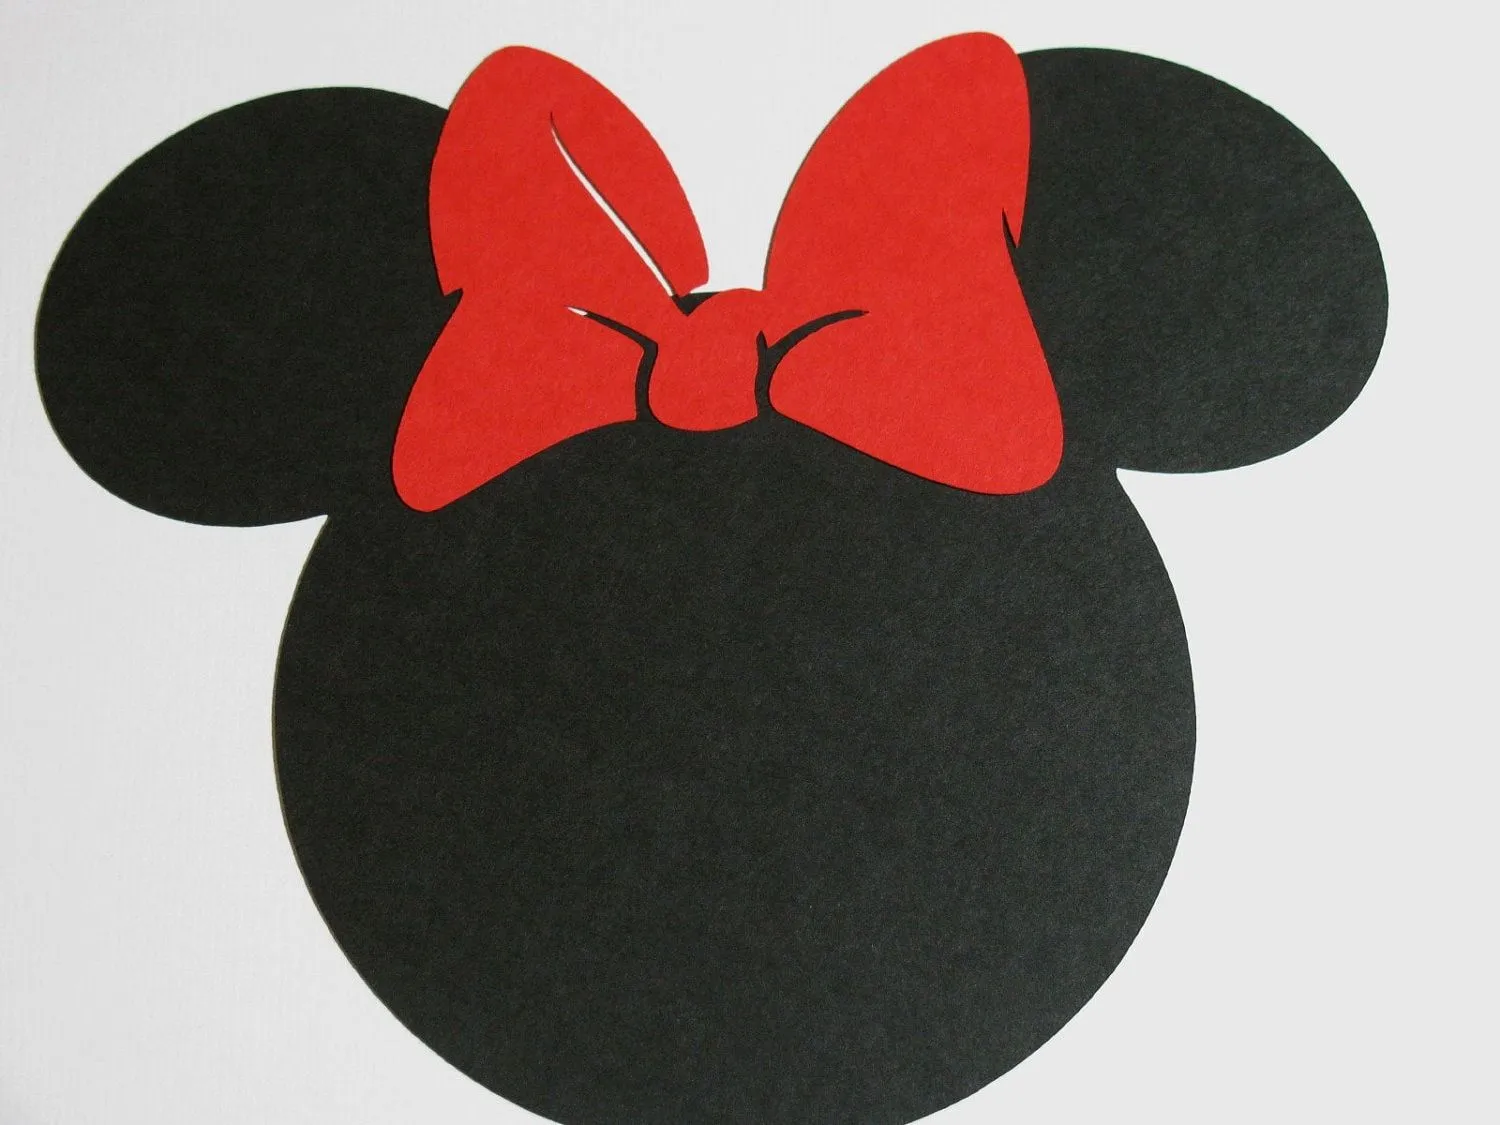 Popular items for minnie mouse ears on Etsy